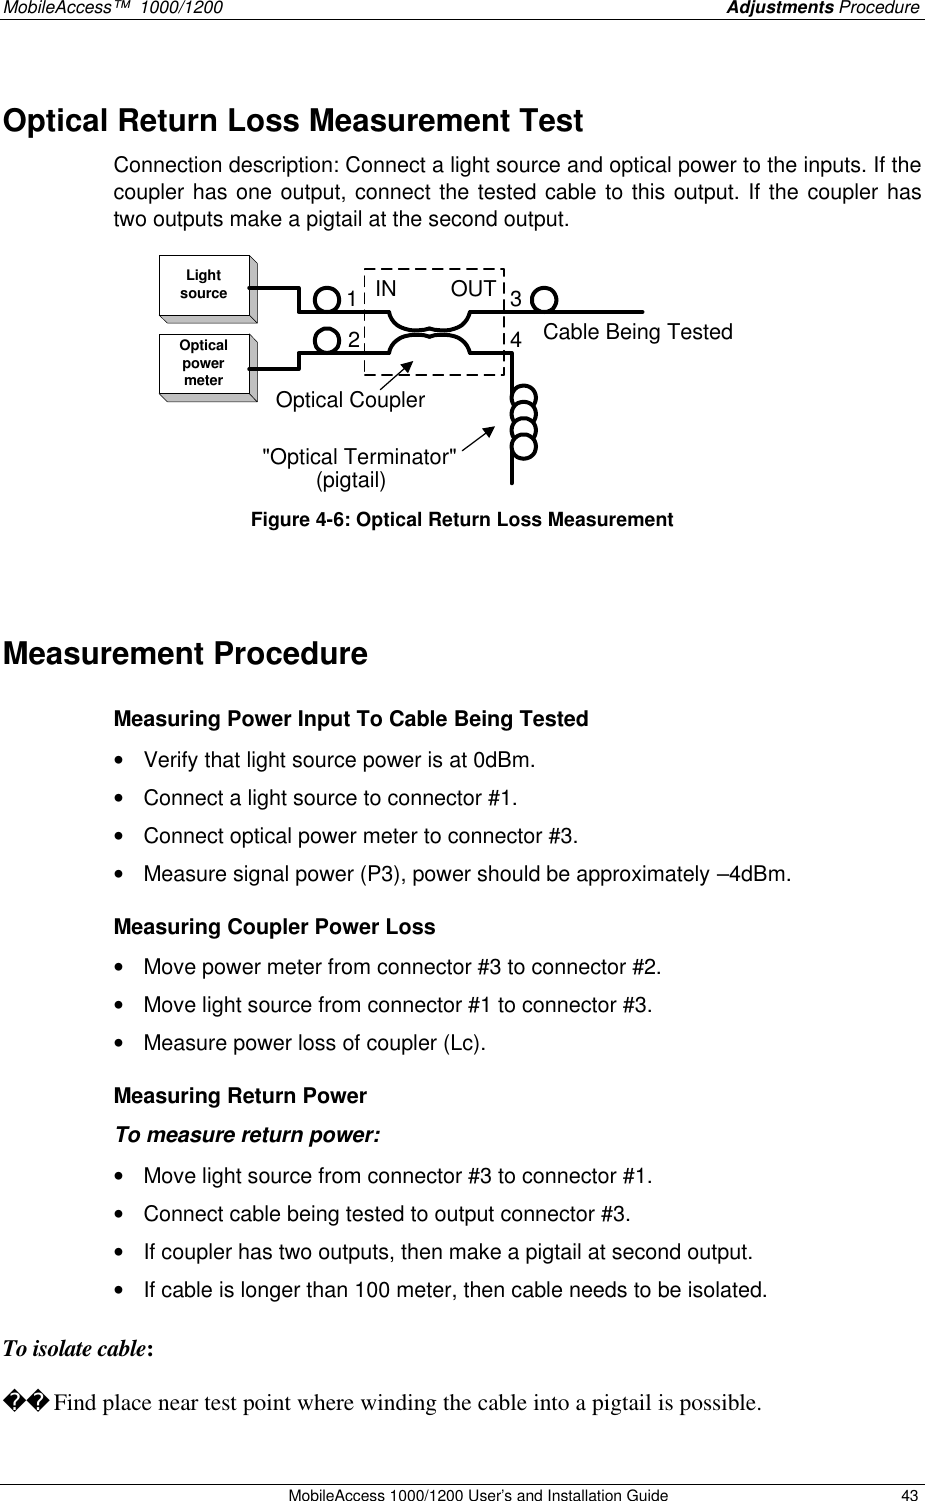 MobileAccess™  1000/1200    Adjustments Procedure  MobileAccess 1000/1200 User’s and Installation Guide 43 Optical Return Loss Measurement Test Connection description: Connect a light source and optical power to the inputs. If the coupler has one output, connect the tested cable to this output. If the coupler has two outputs make a pigtail at the second output. LightsourceOpticalpowermeterIN         OUT(pigtail)Cable Being Tested2134&quot;Optical Terminator&quot;Optical Coupler Figure 4-6: Optical Return Loss Measurement   Measurement Procedure  Measuring Power Input To Cable Being Tested • Verify that light source power is at 0dBm. • Connect a light source to connector #1.  • Connect optical power meter to connector #3. • Measure signal power (P3), power should be approximately –4dBm.  Measuring Coupler Power Loss • Move power meter from connector #3 to connector #2. • Move light source from connector #1 to connector #3. • Measure power loss of coupler (Lc).  Measuring Return Power To measure return power: • Move light source from connector #3 to connector #1. • Connect cable being tested to output connector #3. • If coupler has two outputs, then make a pigtail at second output. • If cable is longer than 100 meter, then cable needs to be isolated.   To isolate cable:   Find place near test point where winding the cable into a pigtail is possible.  